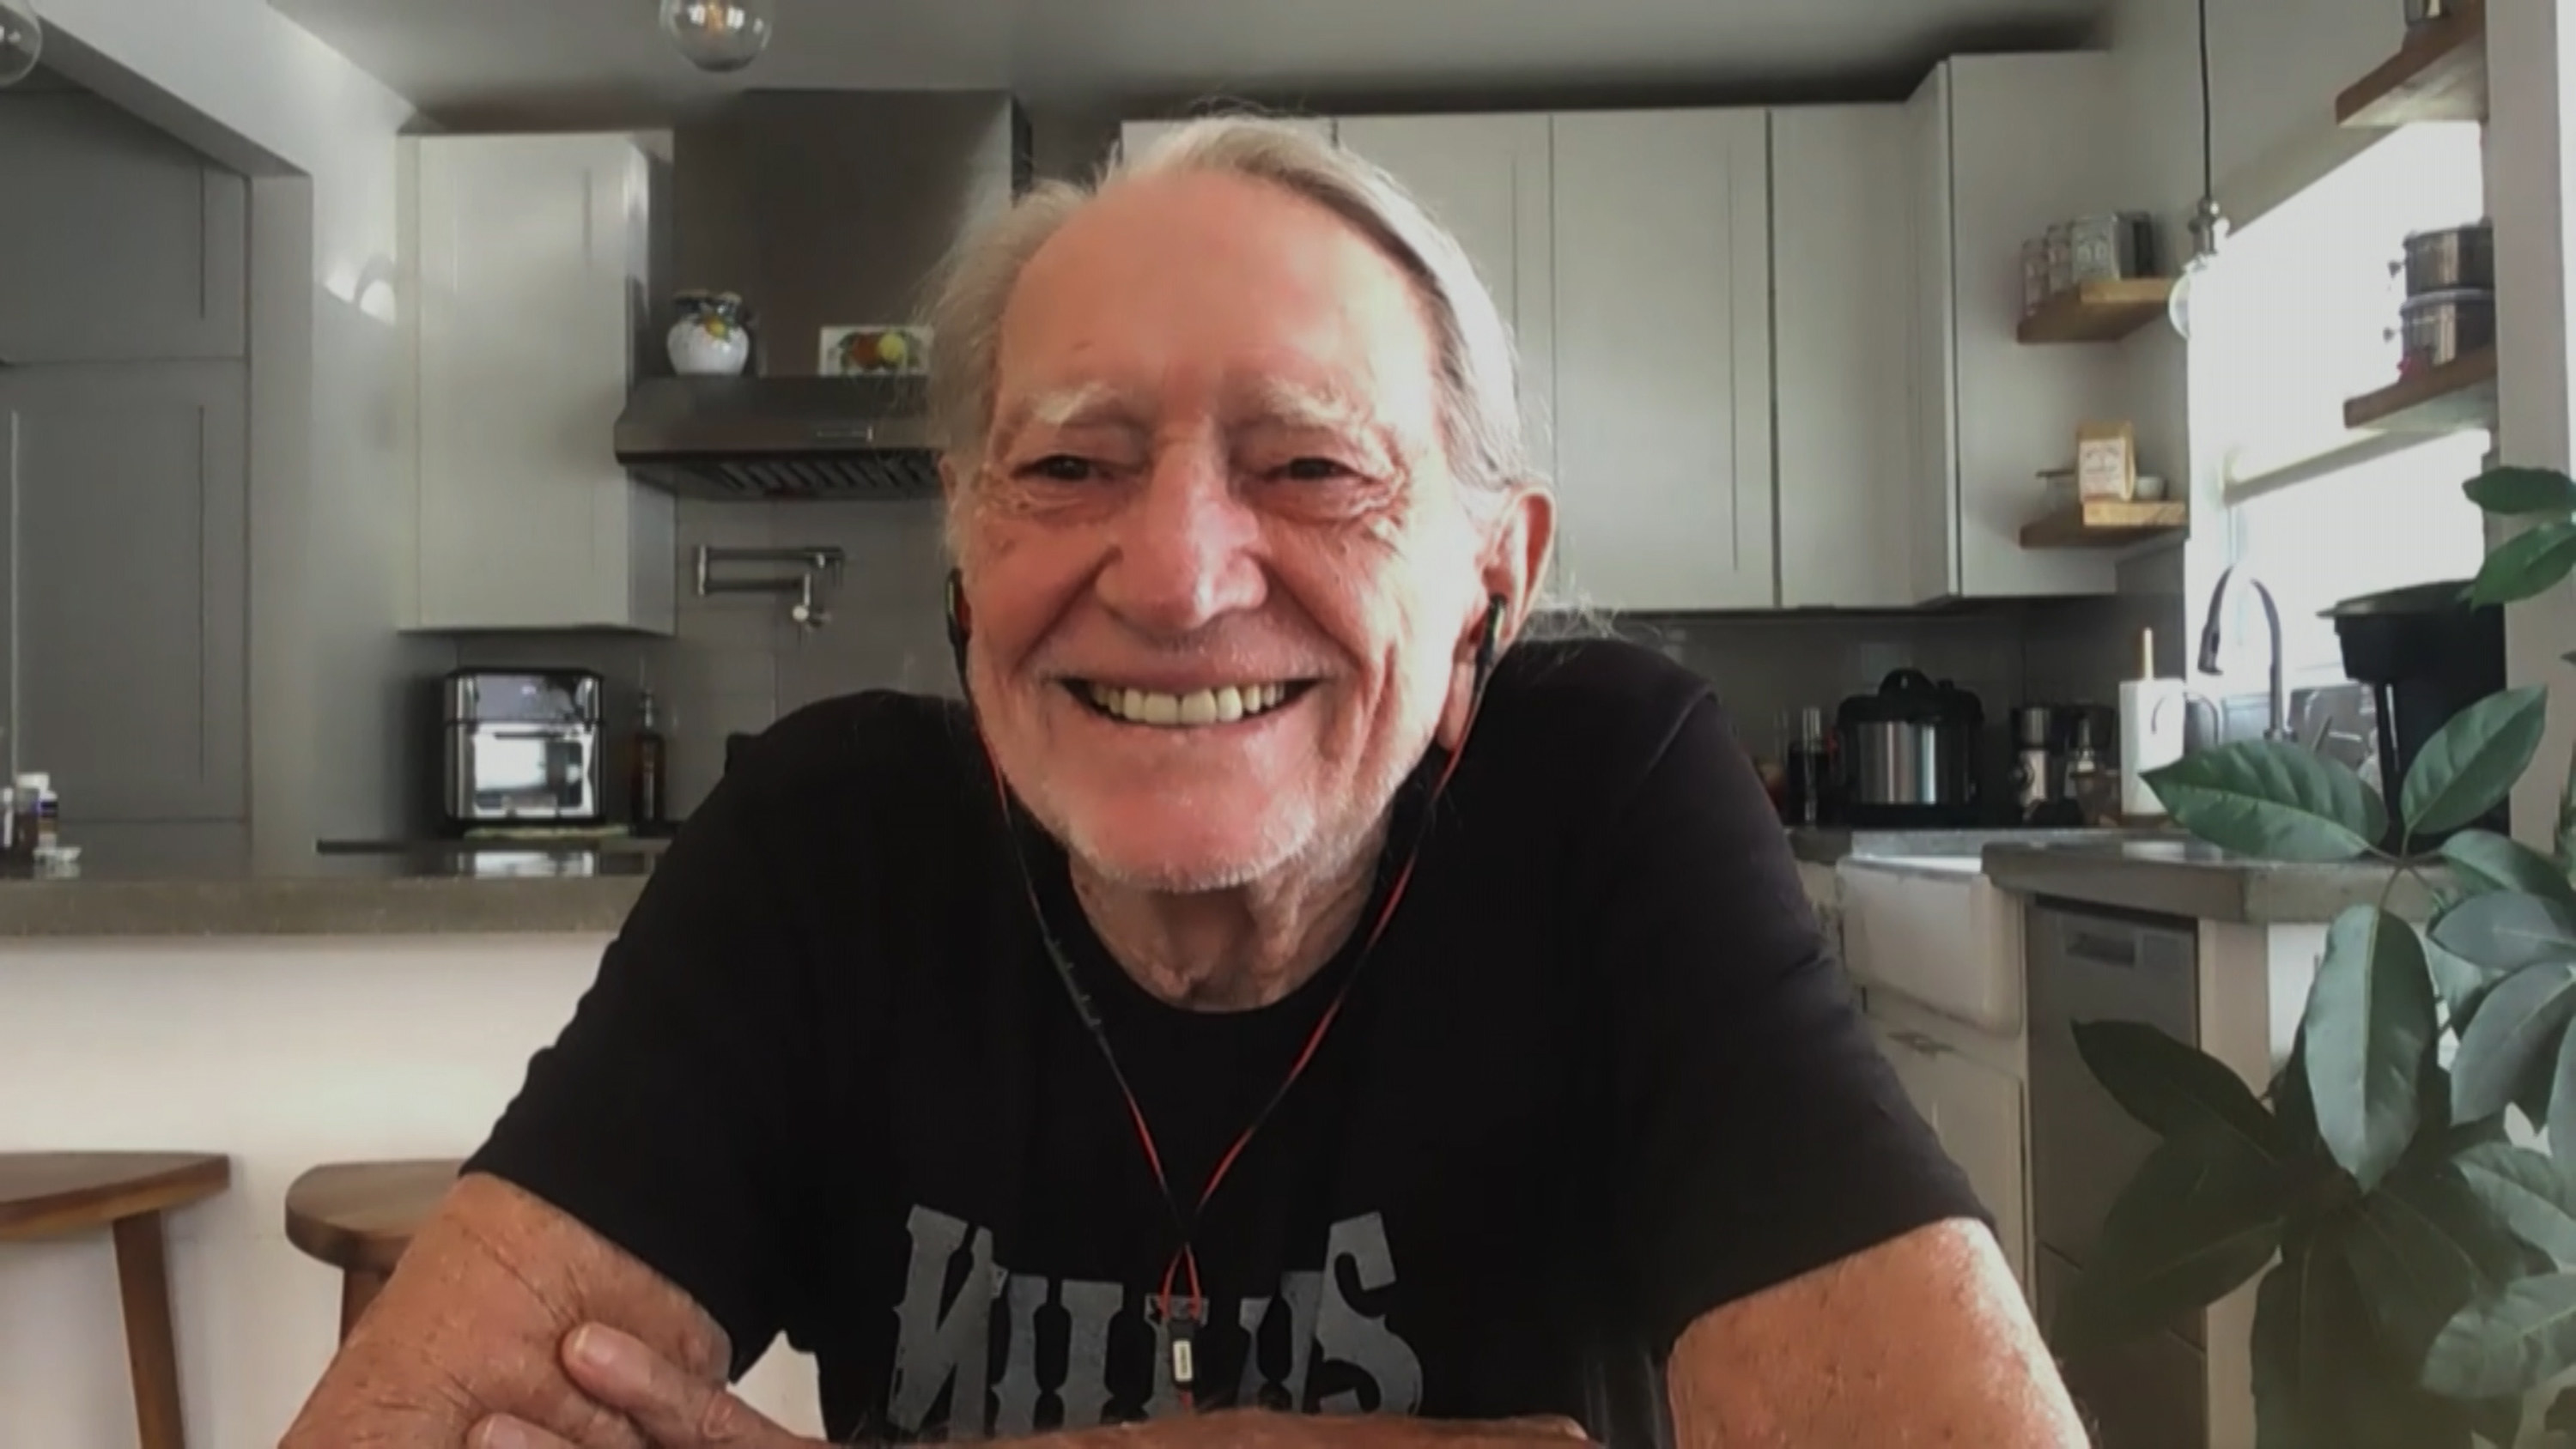 Musician Willie Nelson during an interview on September 15, 2020